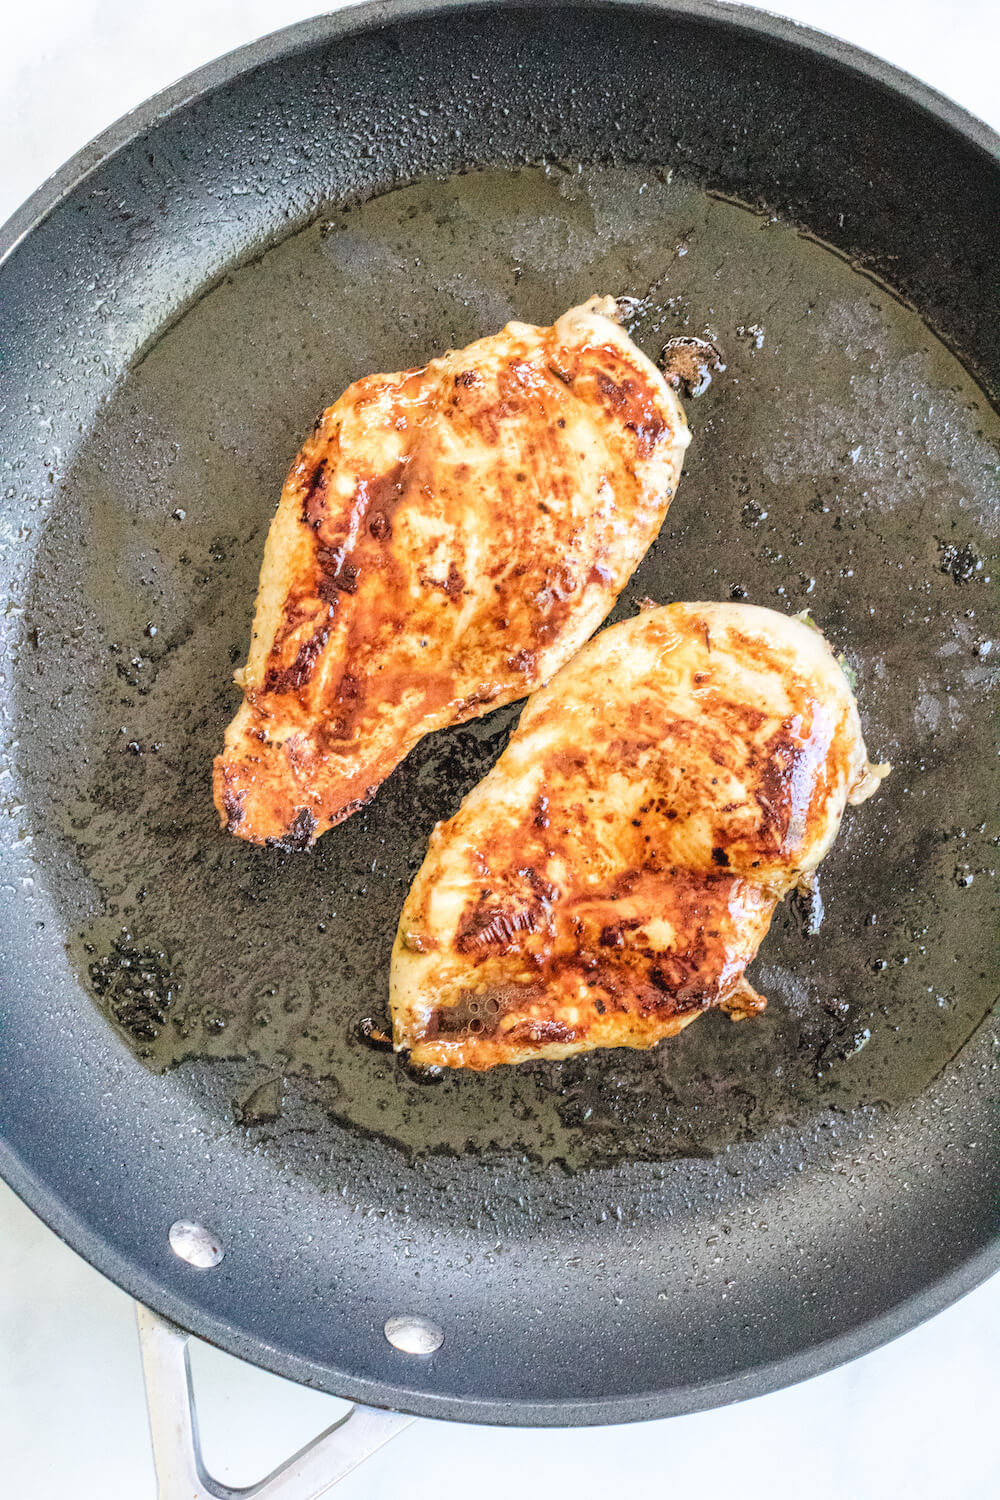 Grilled chicken pieces in a skillet.